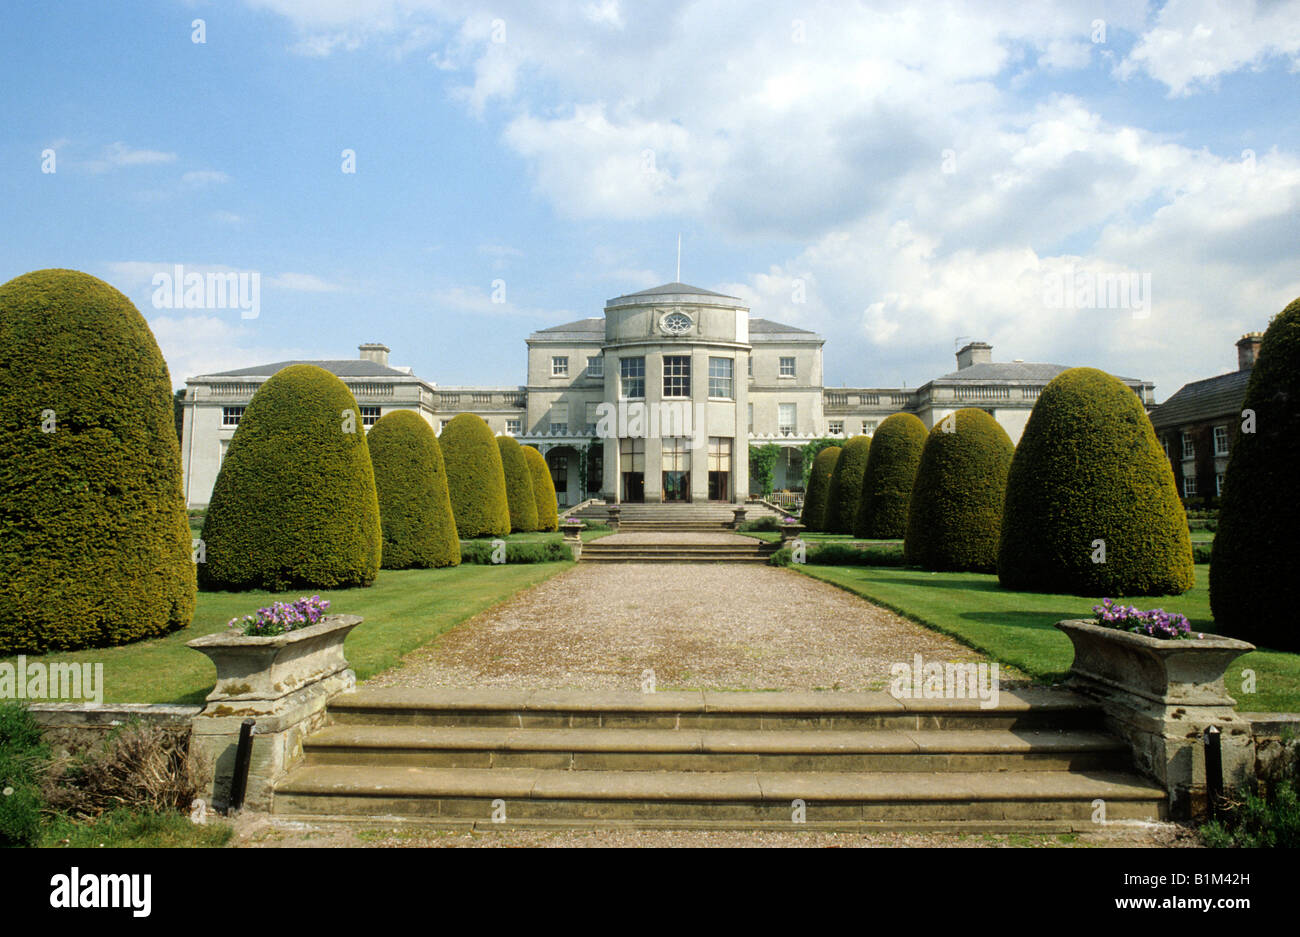 Shugborough Staffordshire house and formal garden Earl of Lichfield sately home England UK yew tree avenue Stock Photo